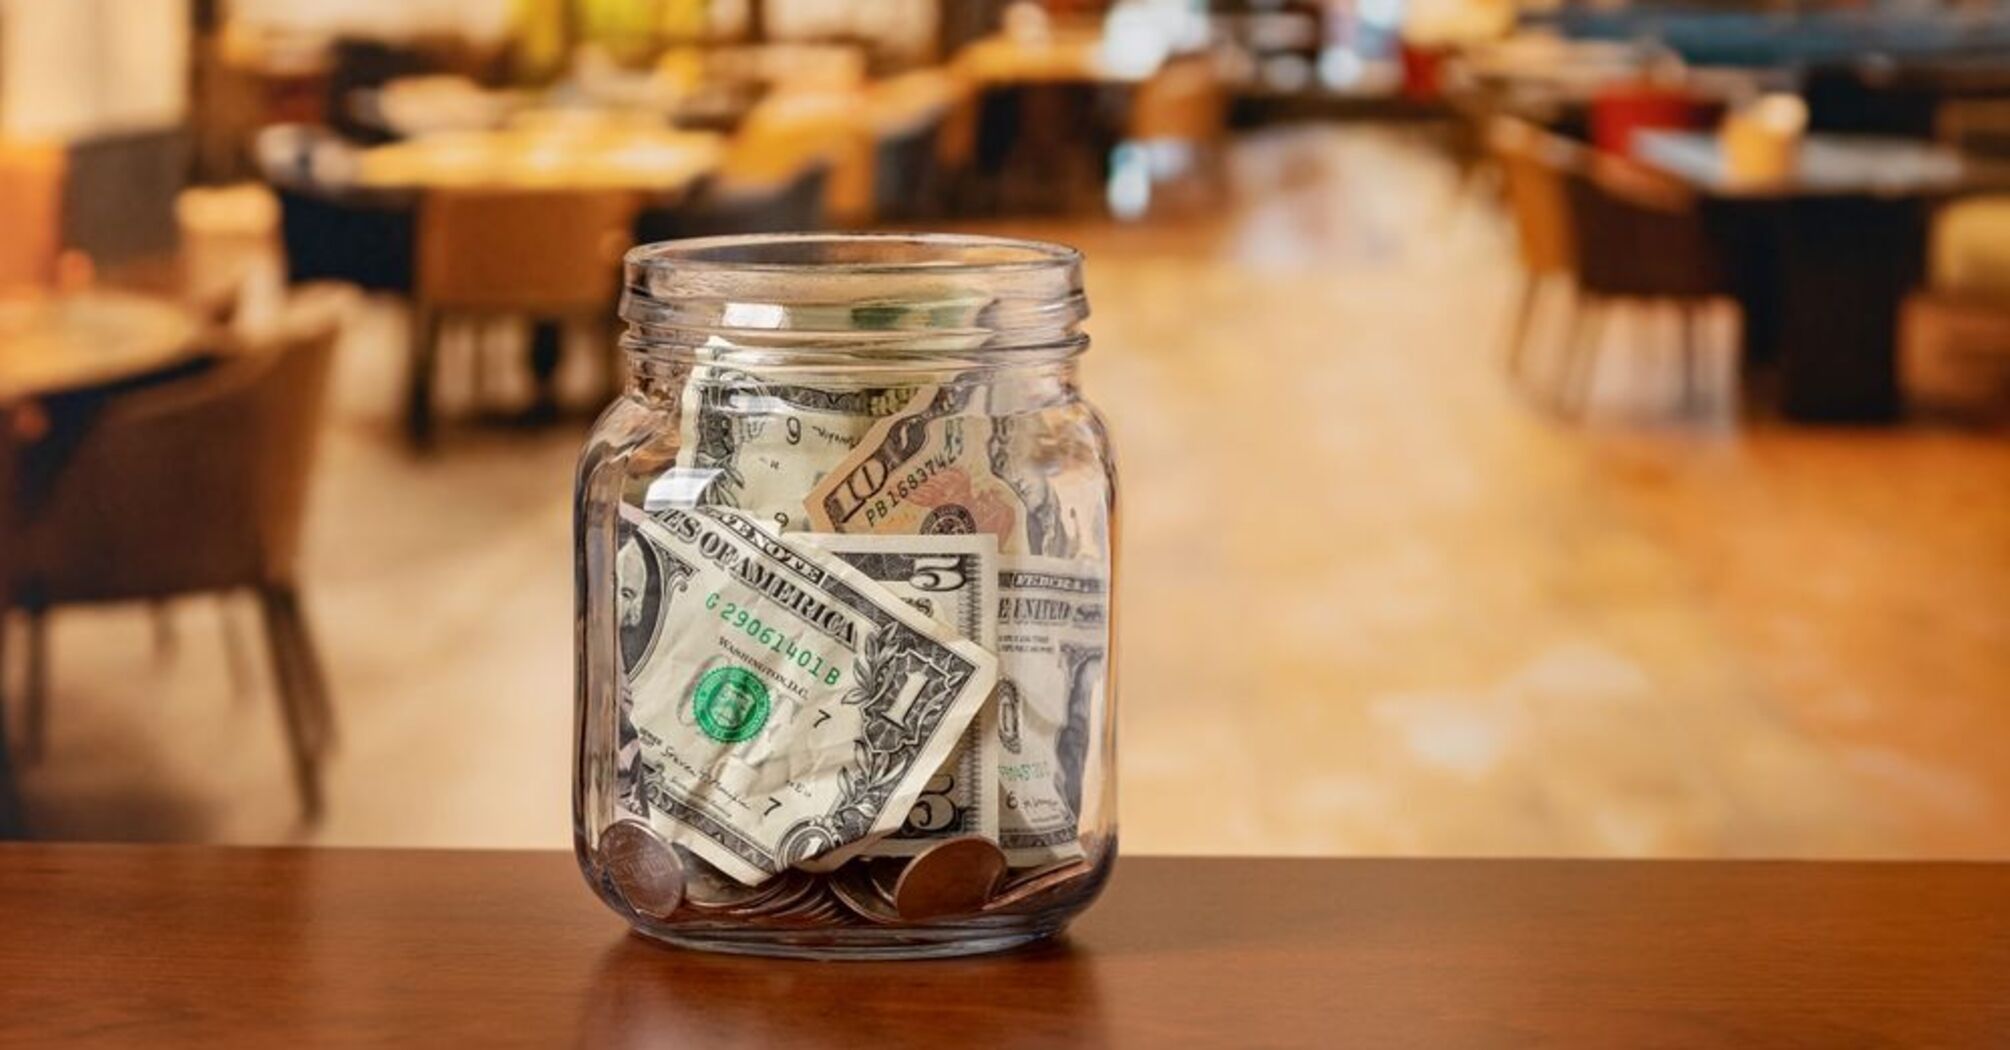 Where to tip when traveling